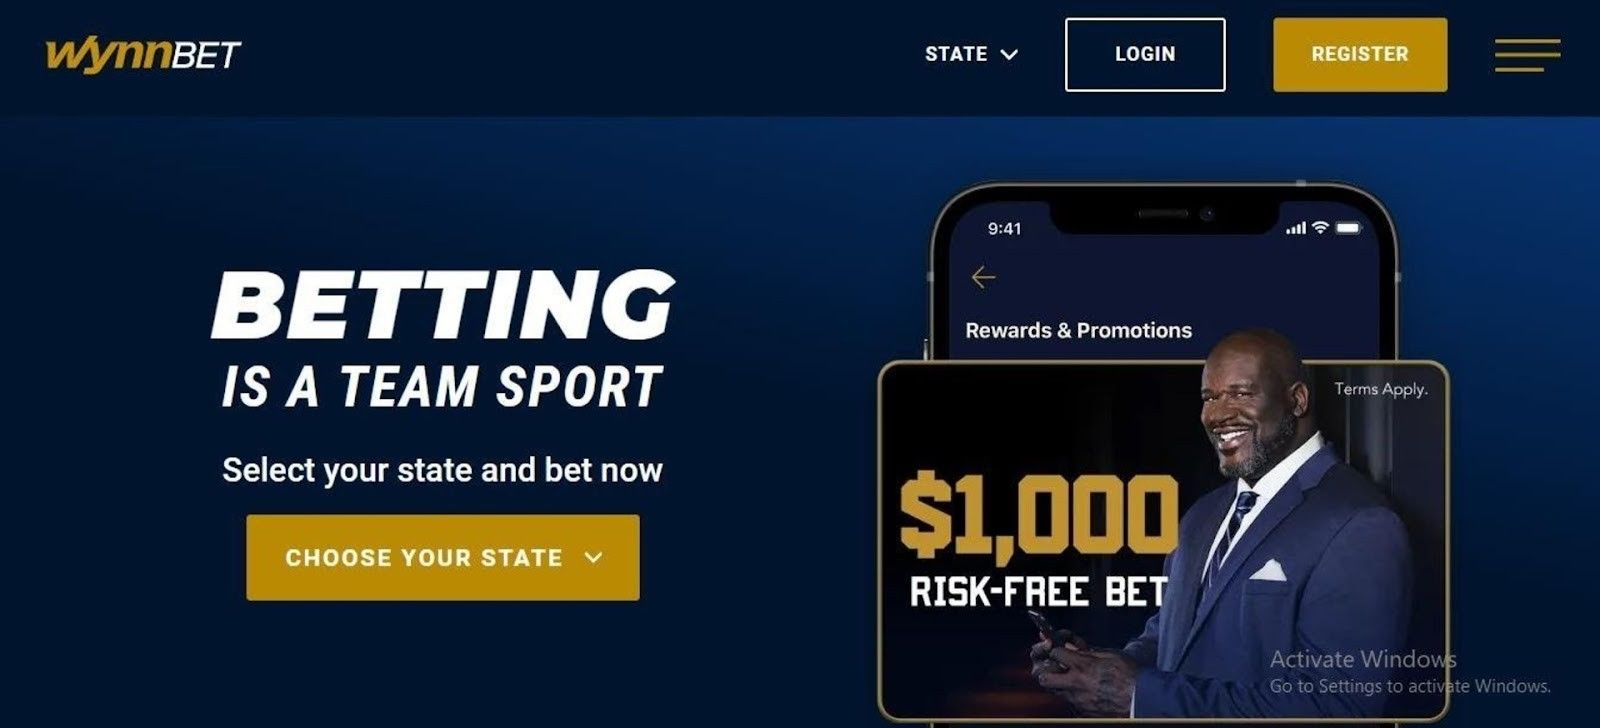 Homepage of Wynn Sports betting site, including to select the state you’re in